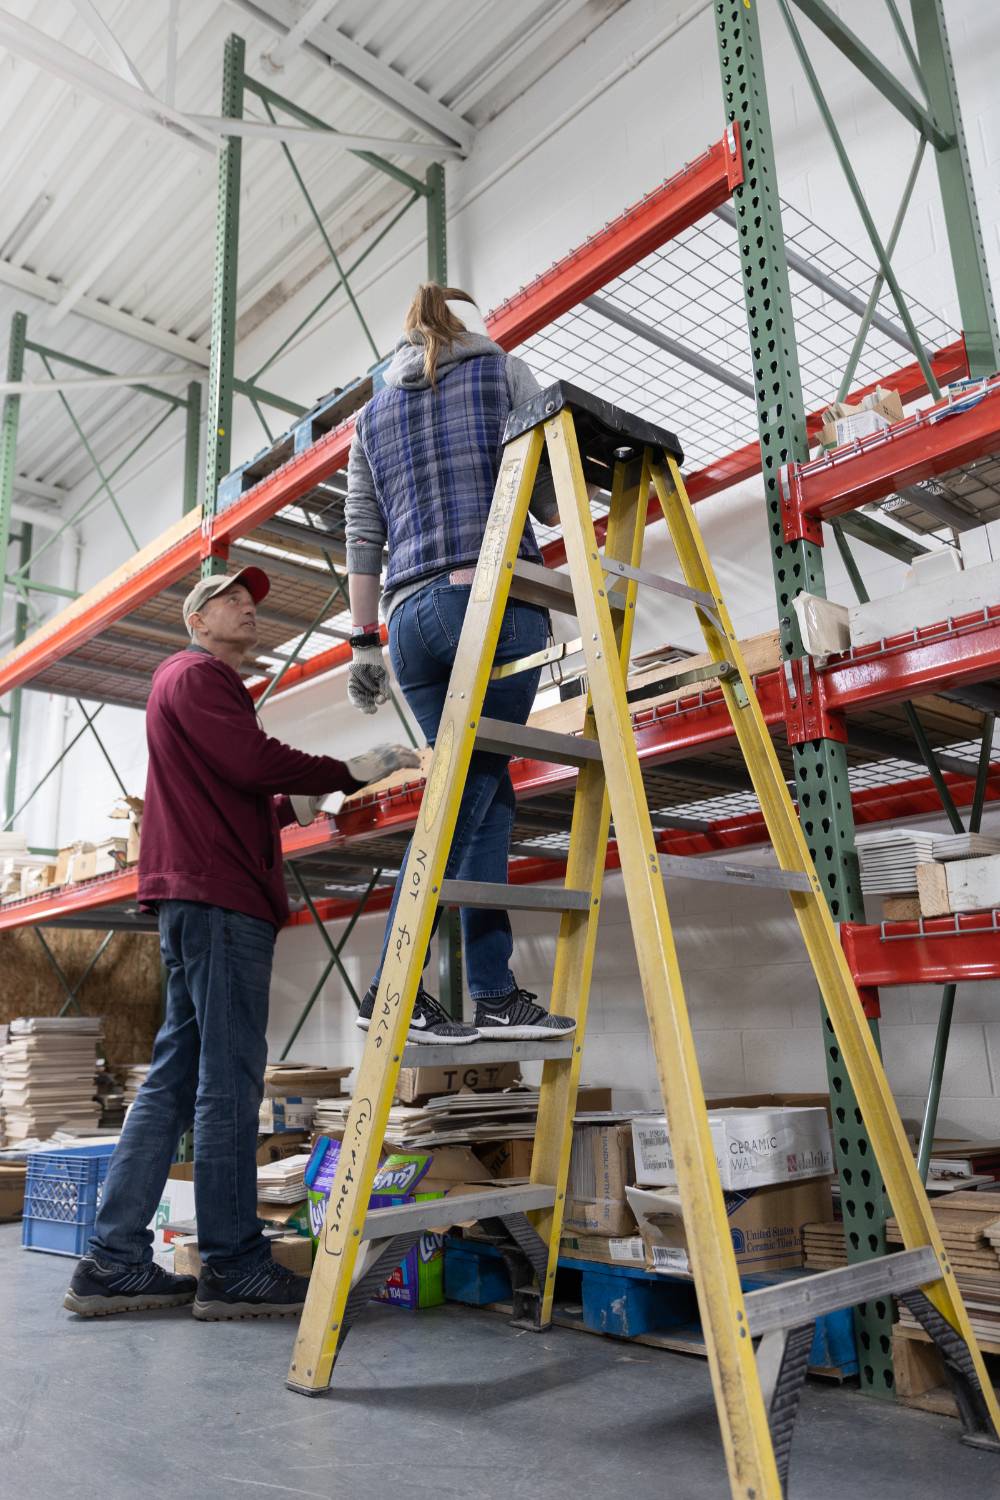 A student stands on a ladder at Restore.